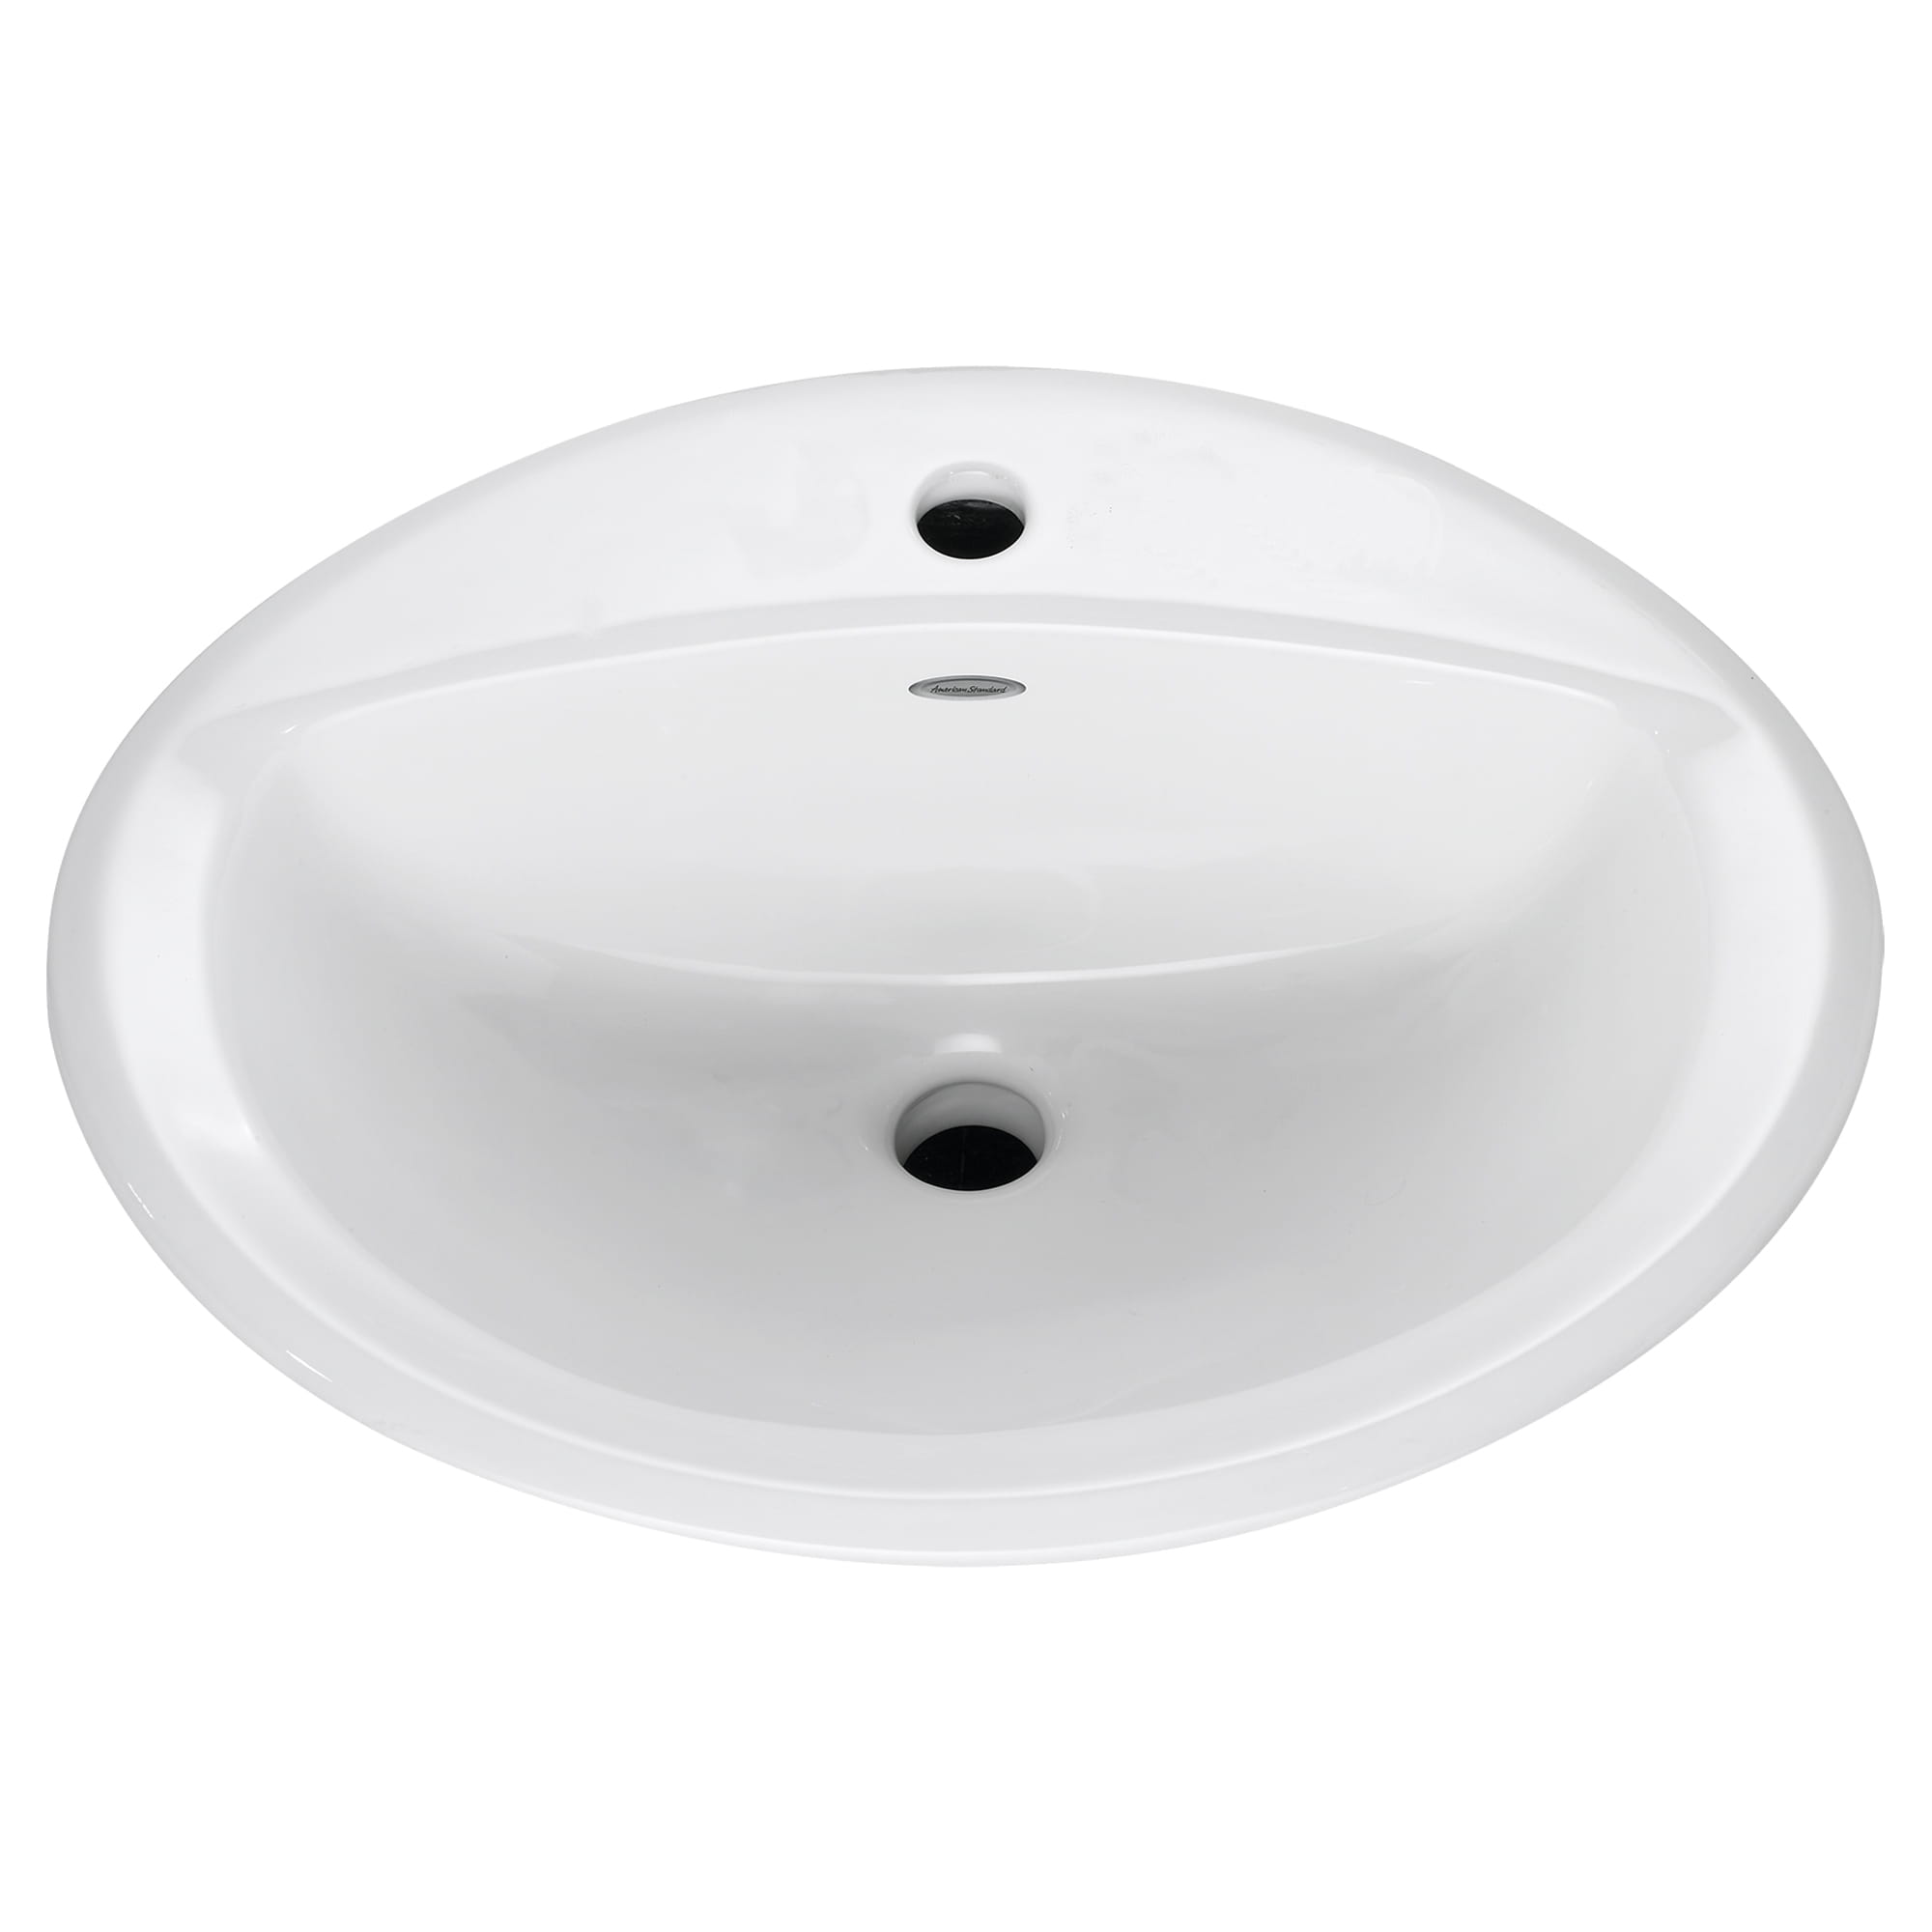 Aqualyn® Countertop Sink With 8-Inch Widespread Less Overflow